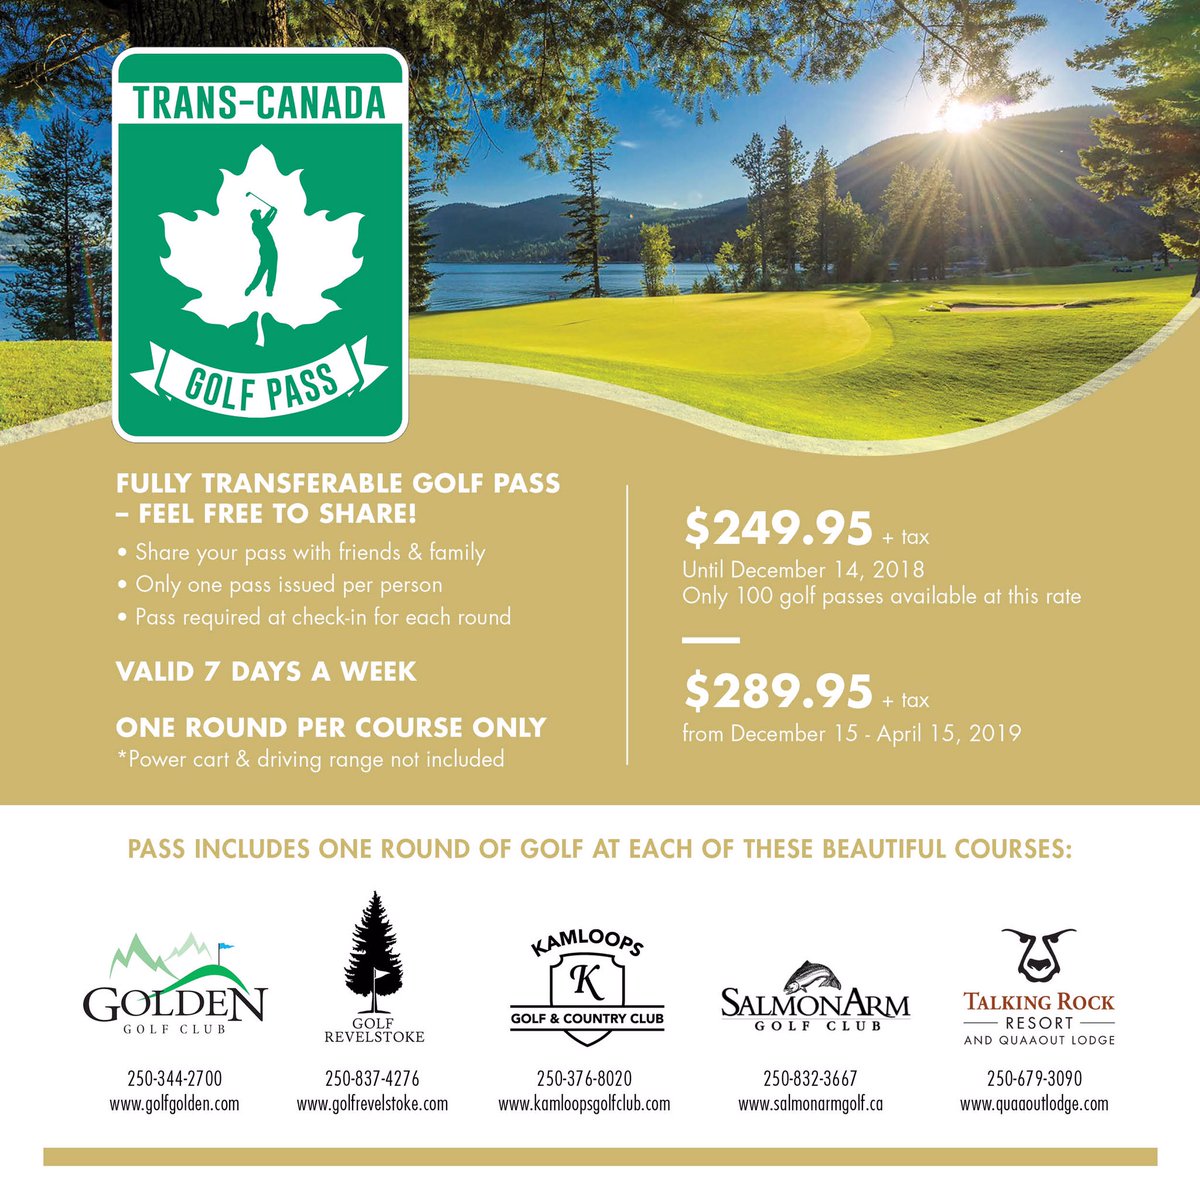 We have partnered up with these 4 awesome courses! @GolfGoldenBC @Talkingrockgolf  @KamloopsGCC @SalmonArmGC Sales end April 15th! Call any of the clubs to purchase! #golf #therealstoke @shuswaptourism @TourismGolden @TourismKamloops @SeeRevelstoke